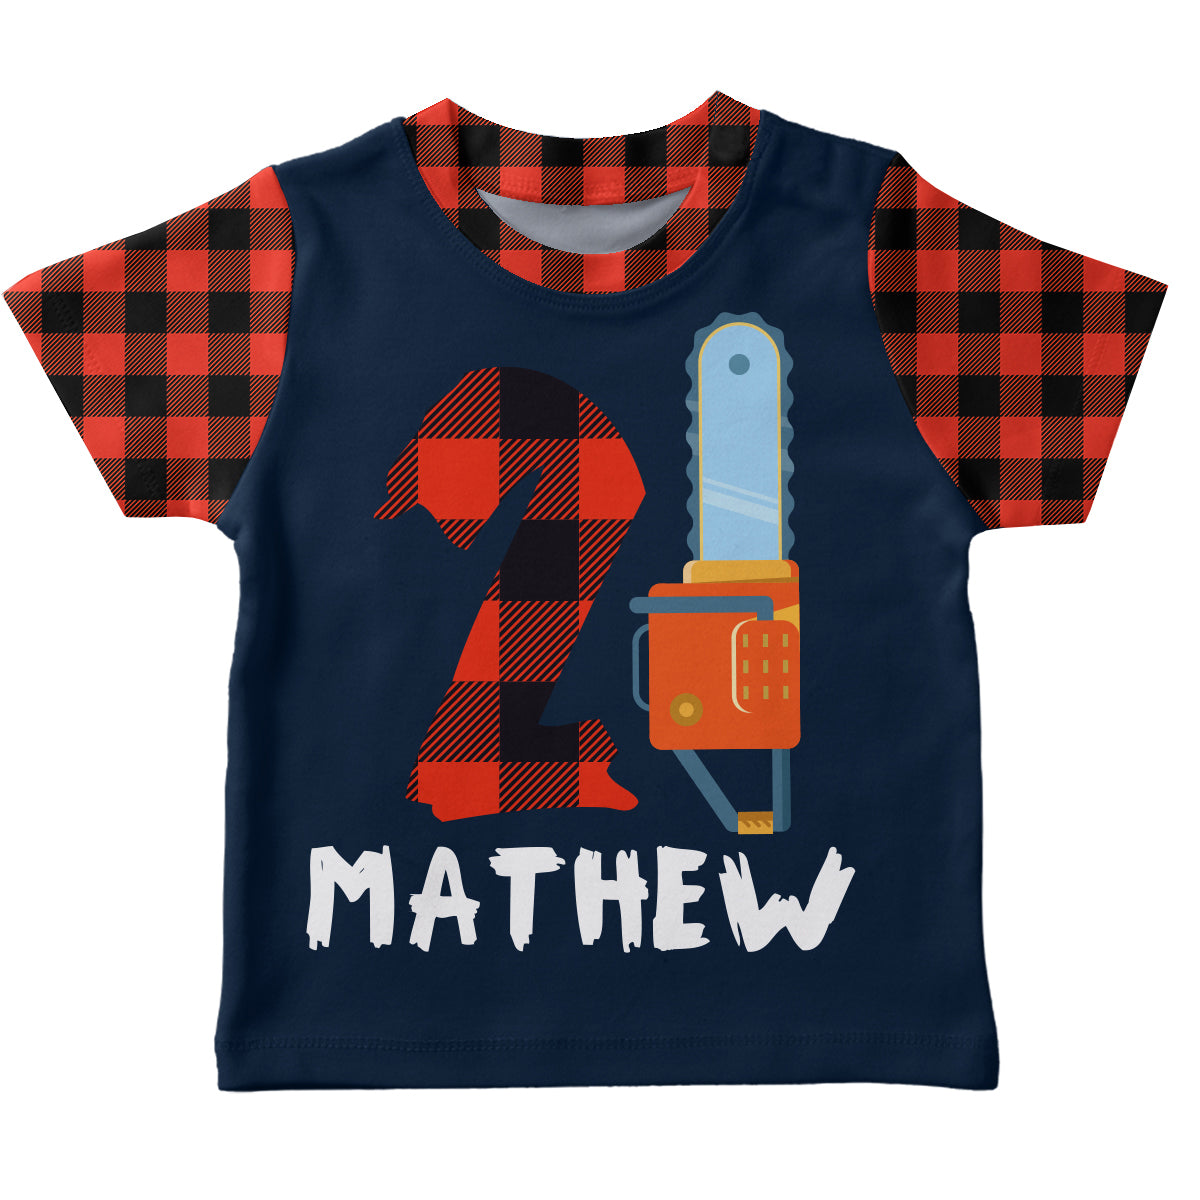 Boys navy and red plaid lumberjack short sleeve tee shirt with name and number - Wimziy&Co.